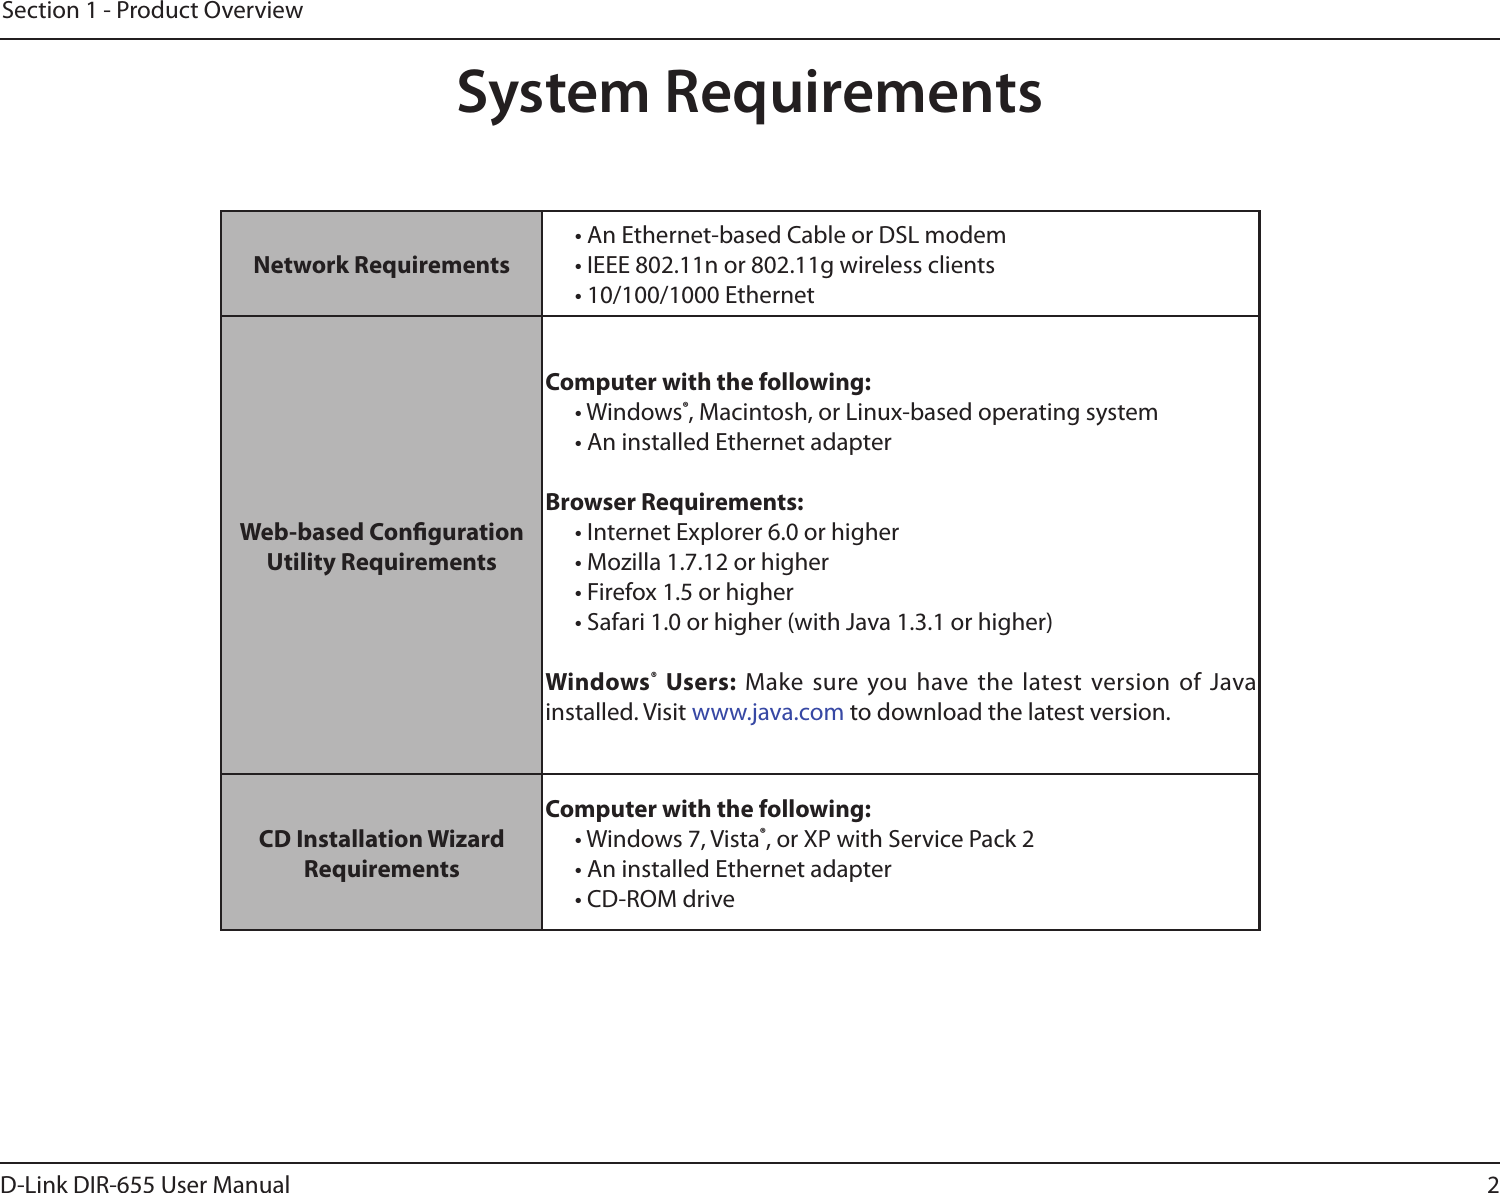 2D-Link DIR-655 User ManualSection 1 - Product OverviewSystem RequirementsNetwork Requirements• An Ethernet-based Cable or DSL modem• IEEE 802.11n or 802.11g wireless clients• 10/100/1000 EthernetWeb-based Conguration Utility RequirementsComputer with the following:• Windows®, Macintosh, or Linux-based operating system • An installed Ethernet adapterBrowser Requirements:• Internet Explorer 6.0 or higher• Mozilla 1.7.12 or higher• Firefox 1.5 or higher• Safari 1.0 or higher (with Java 1.3.1 or higher) Windows®  Users:  Make  sure  you  have  the  latest  version  of  Java installed. Visit www.java.com to download the latest version.CD Installation Wizard RequirementsComputer with the following:• Windows 7, Vista®, or XP with Service Pack 2• An installed Ethernet adapter• CD-ROM drive